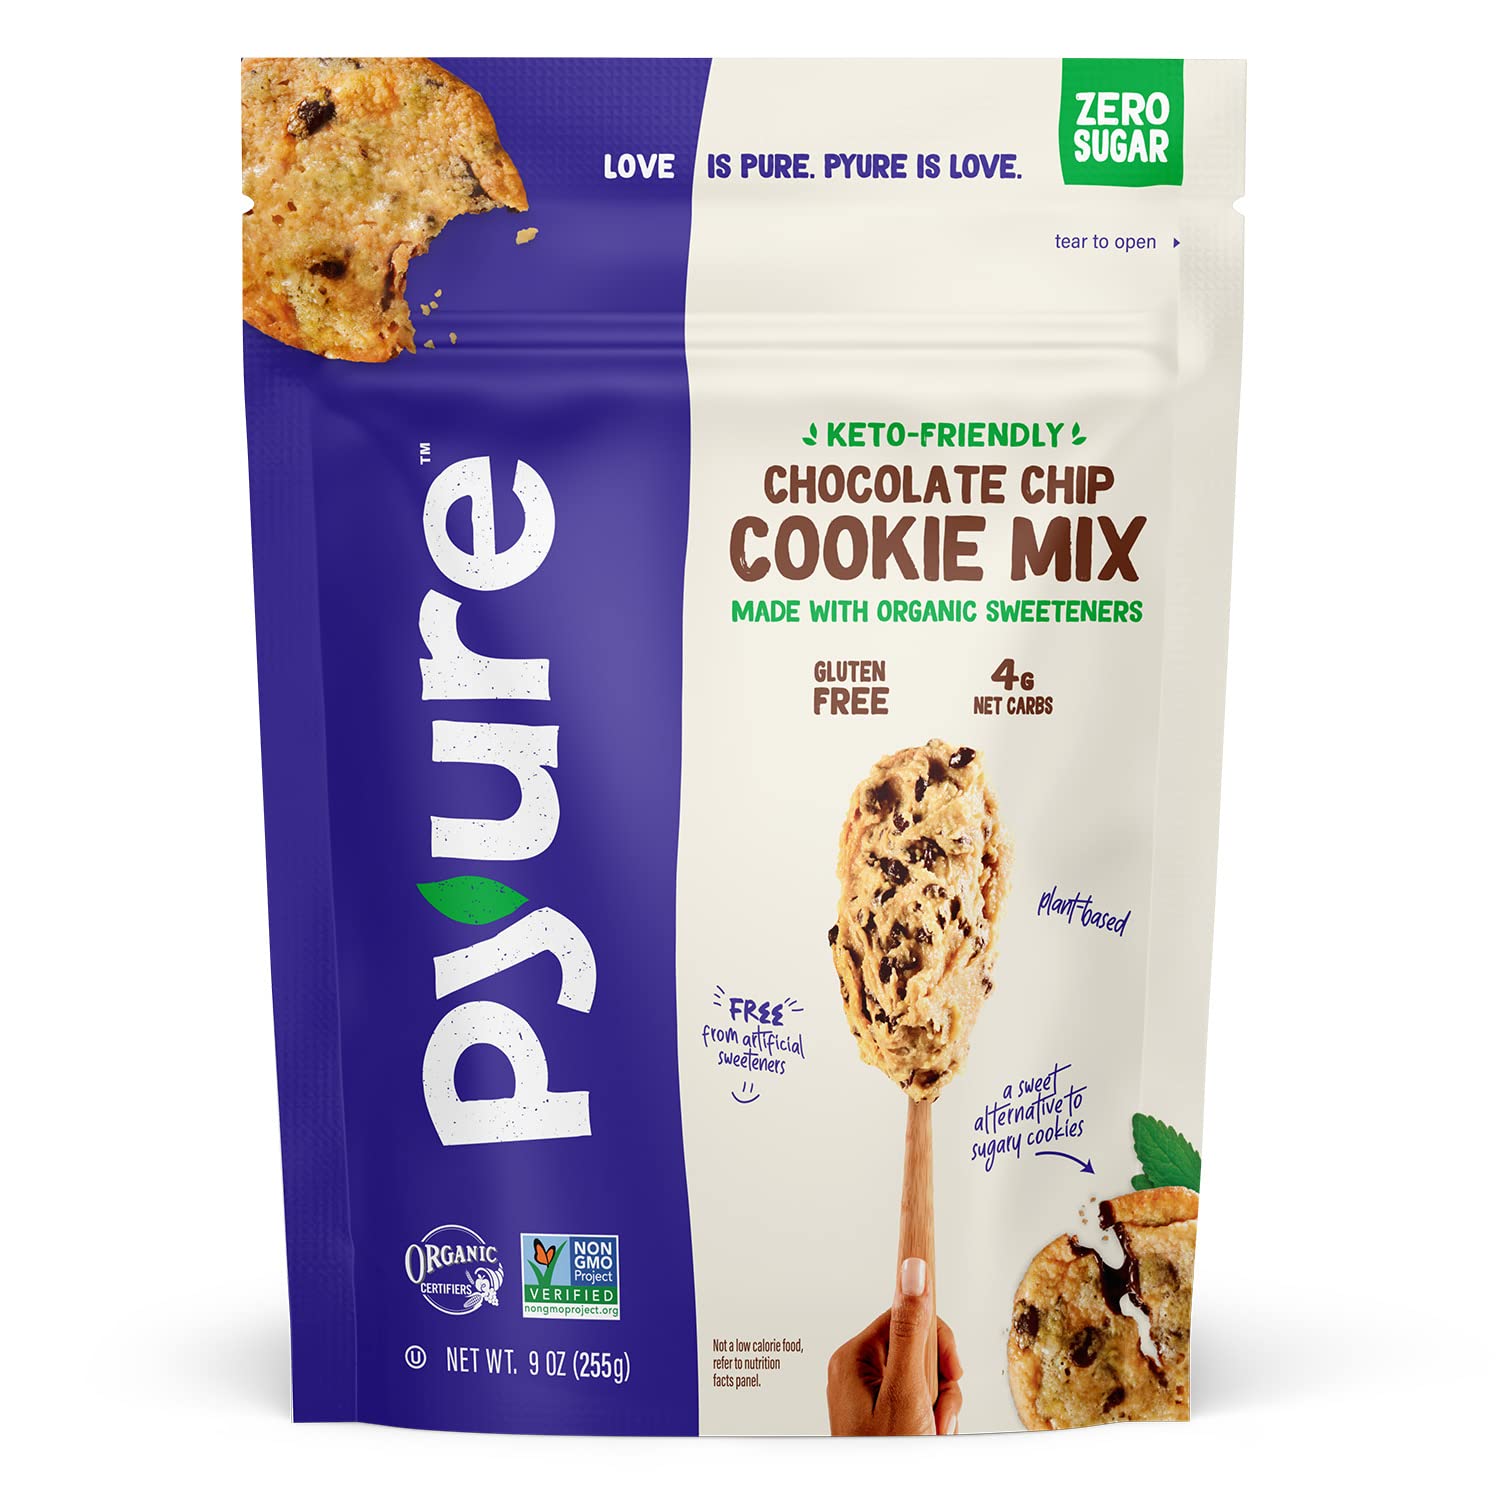 Pyure Chocolate Chip Cookie Mix | Keto Cookies, Sugar Free Cookies, Gluten Free Cookies, Vegan Cookies | 2 Net Carbs Per Cookie | Made With Organic Plant-Based Ingredients | 9 oz